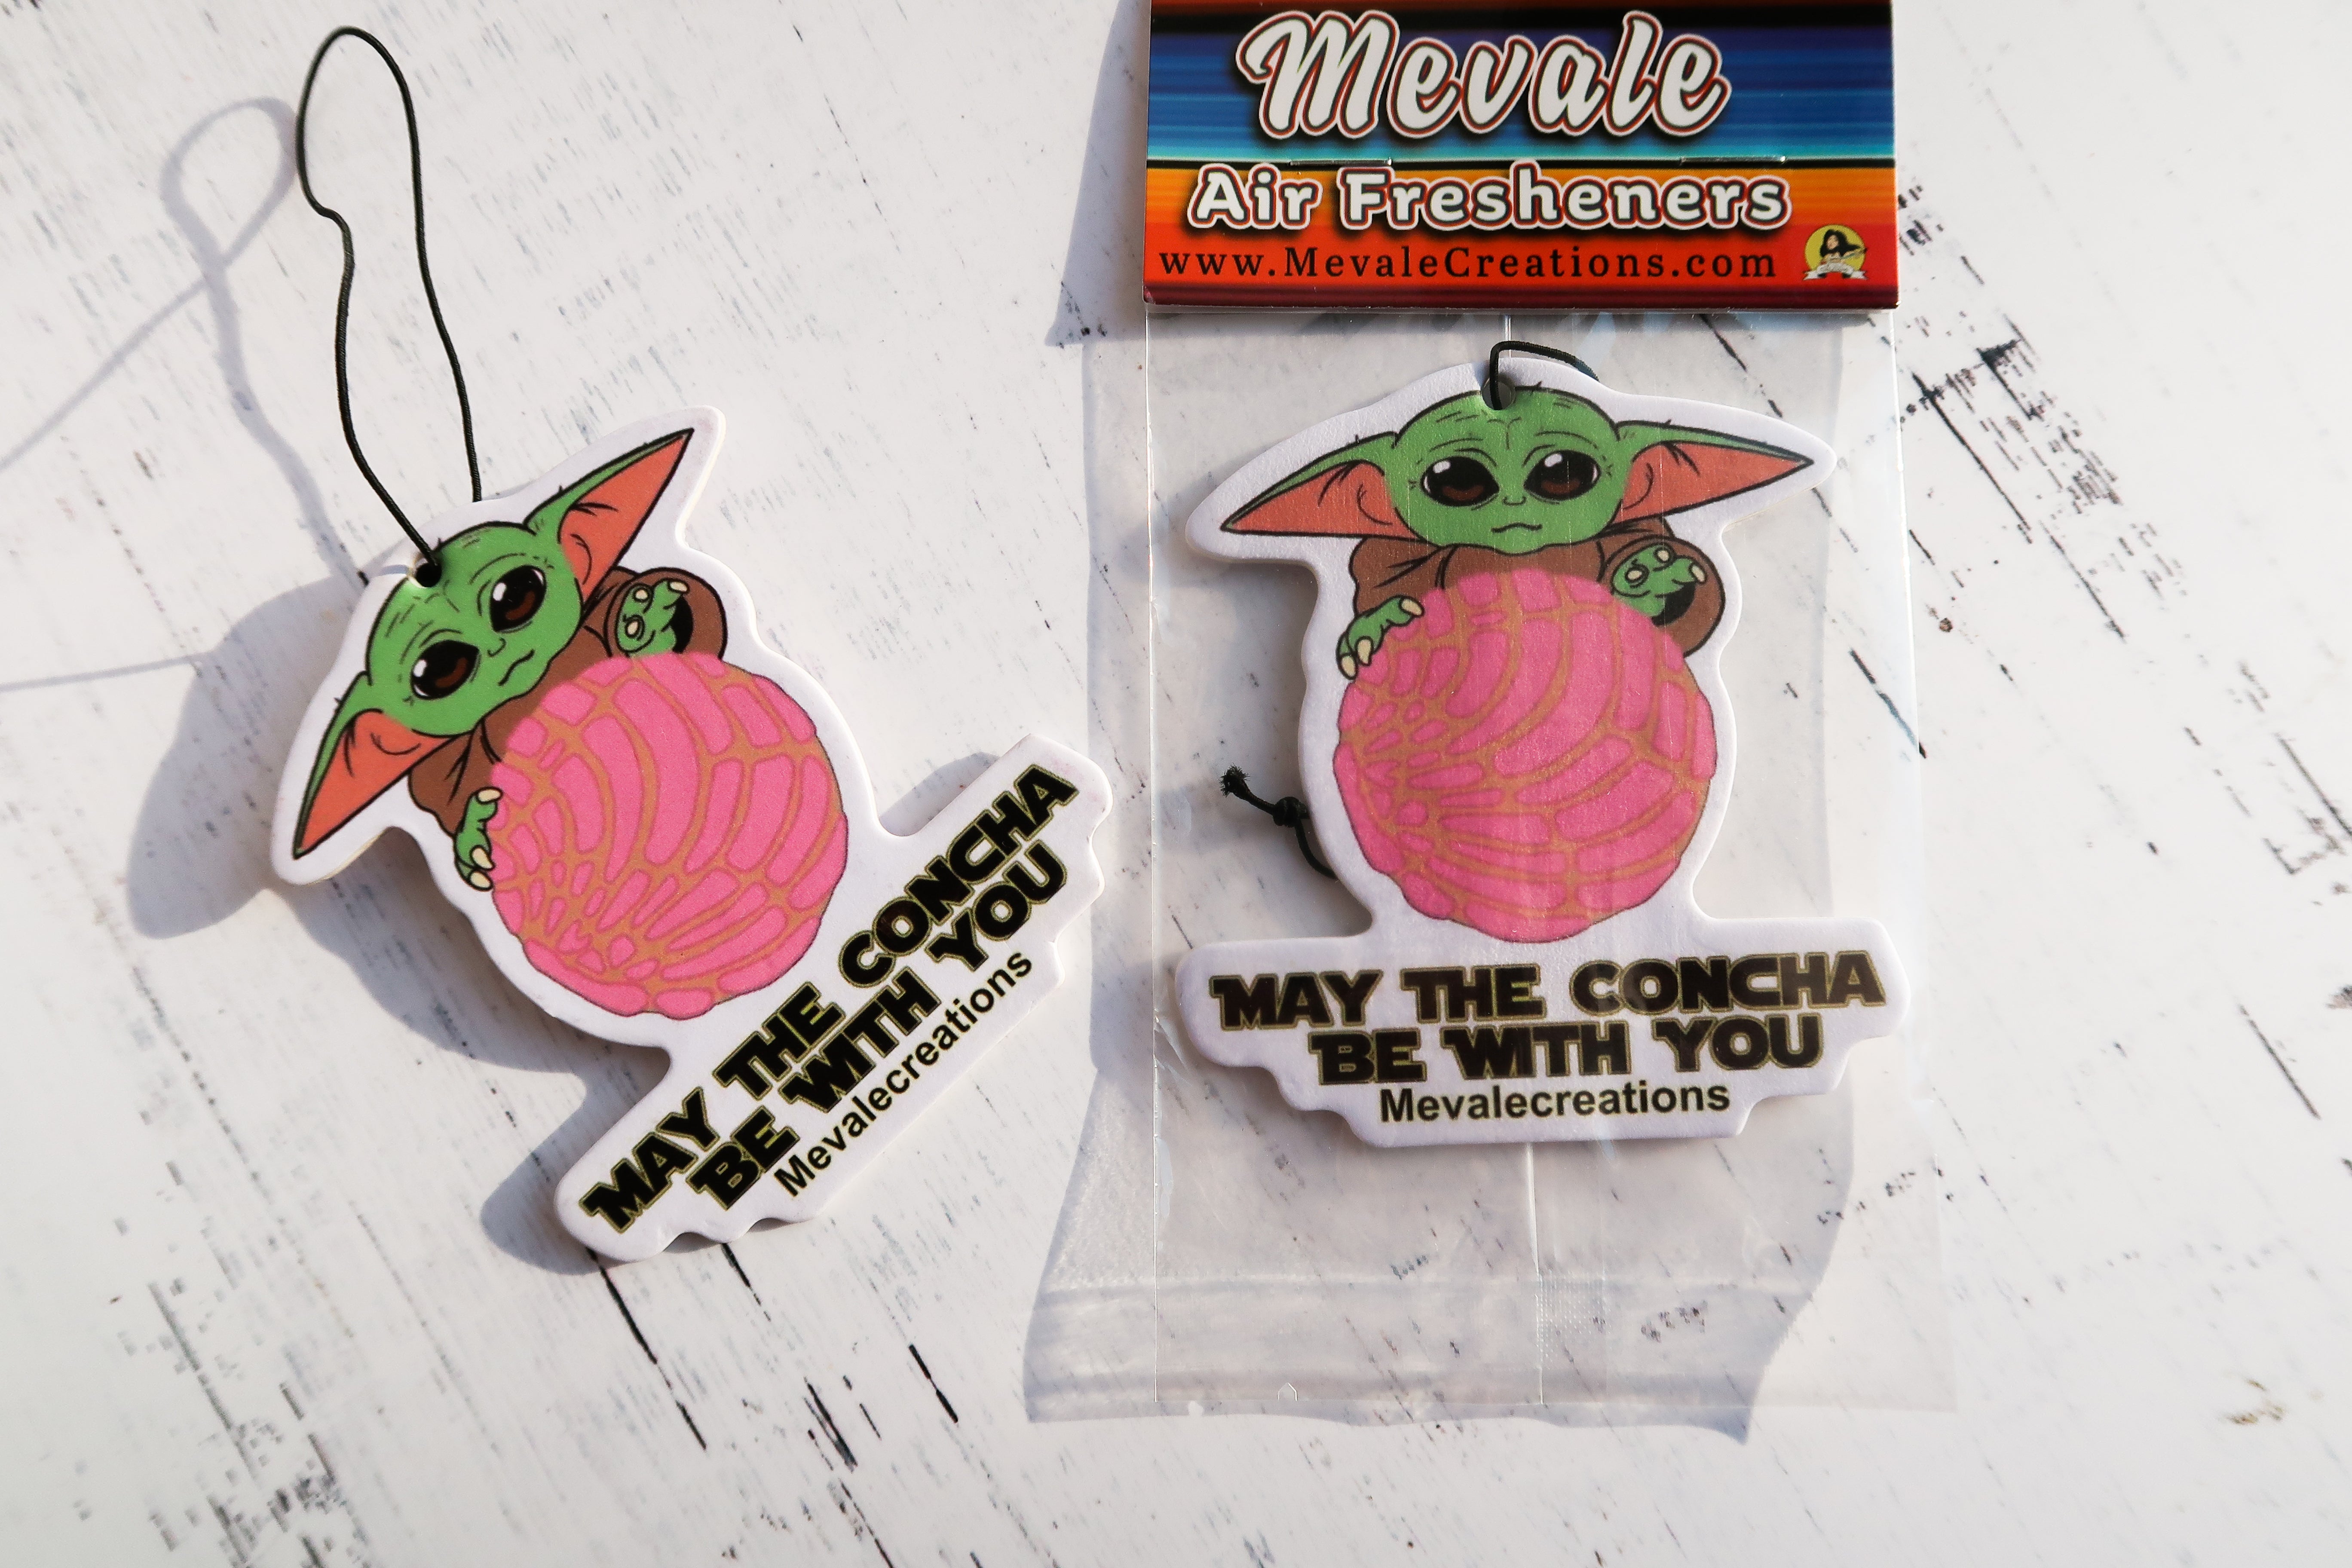 Air Freshener - "May The Concha Be W/You"